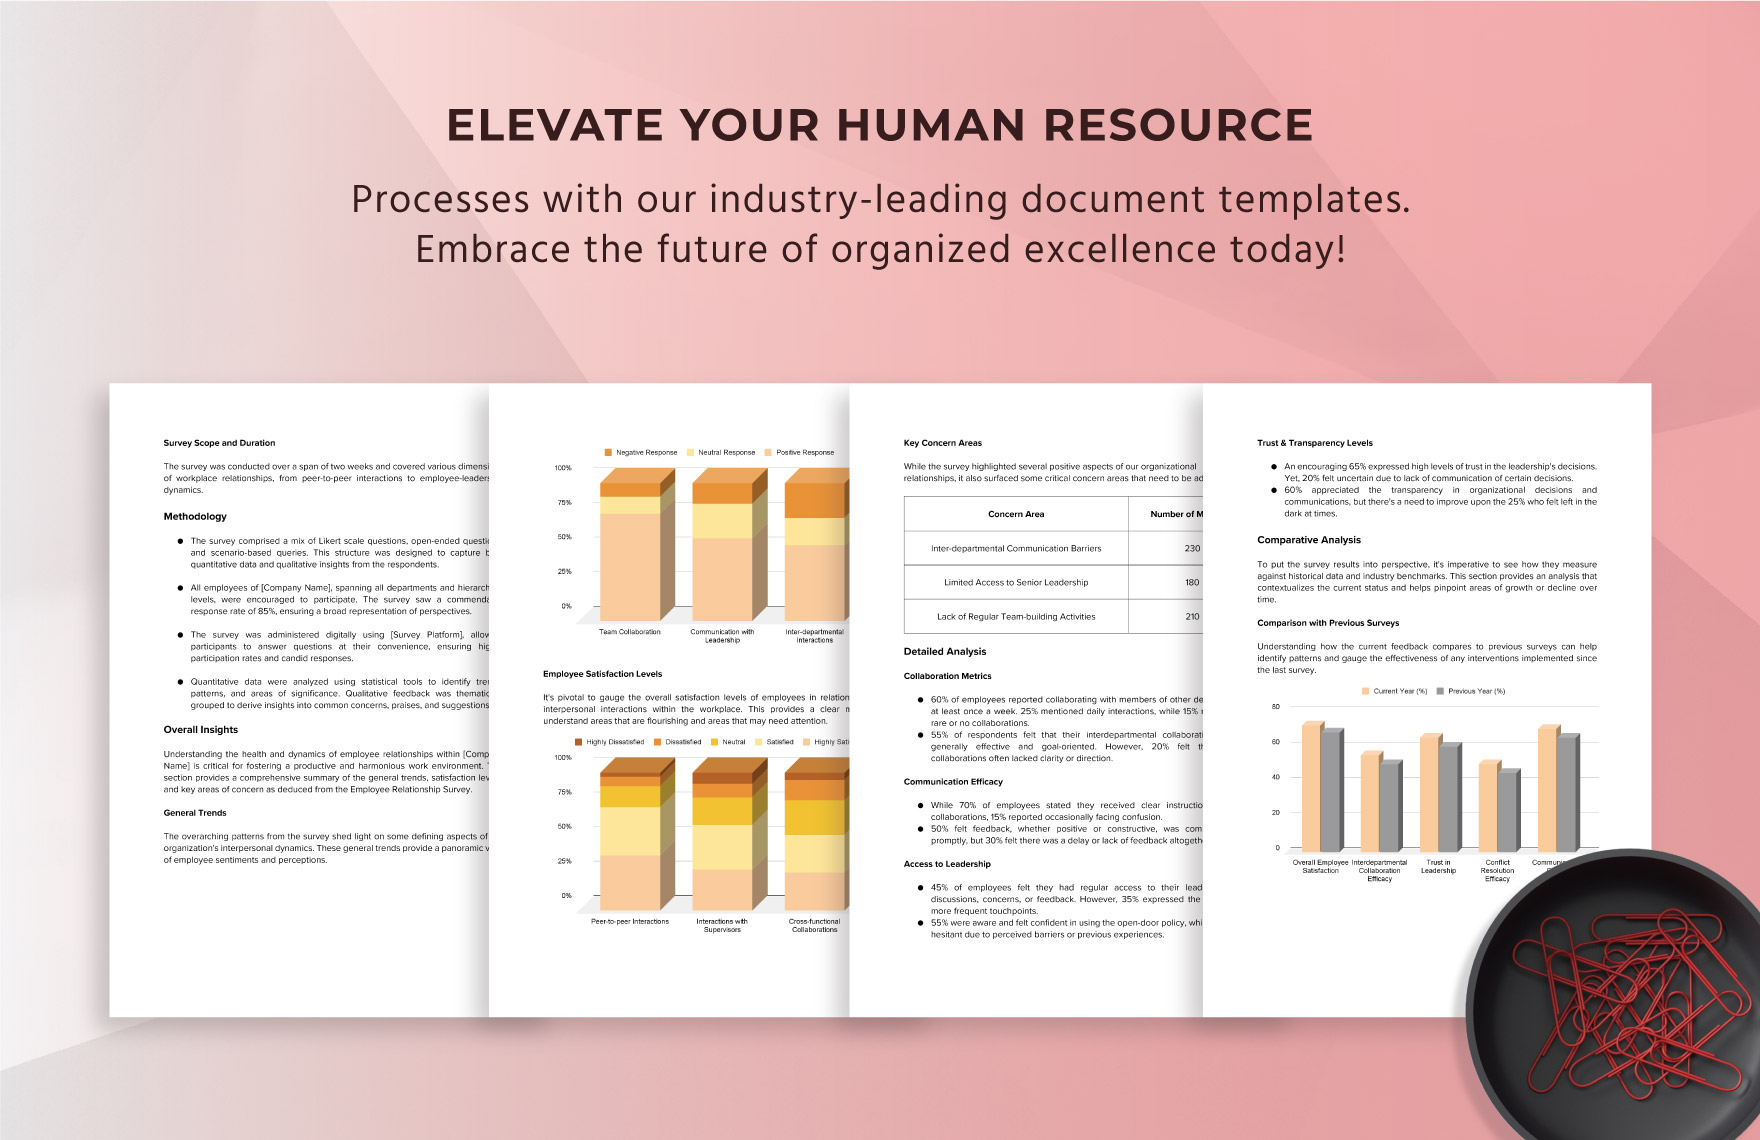 Employee Relationship Survey Insights & Analysis HR Template